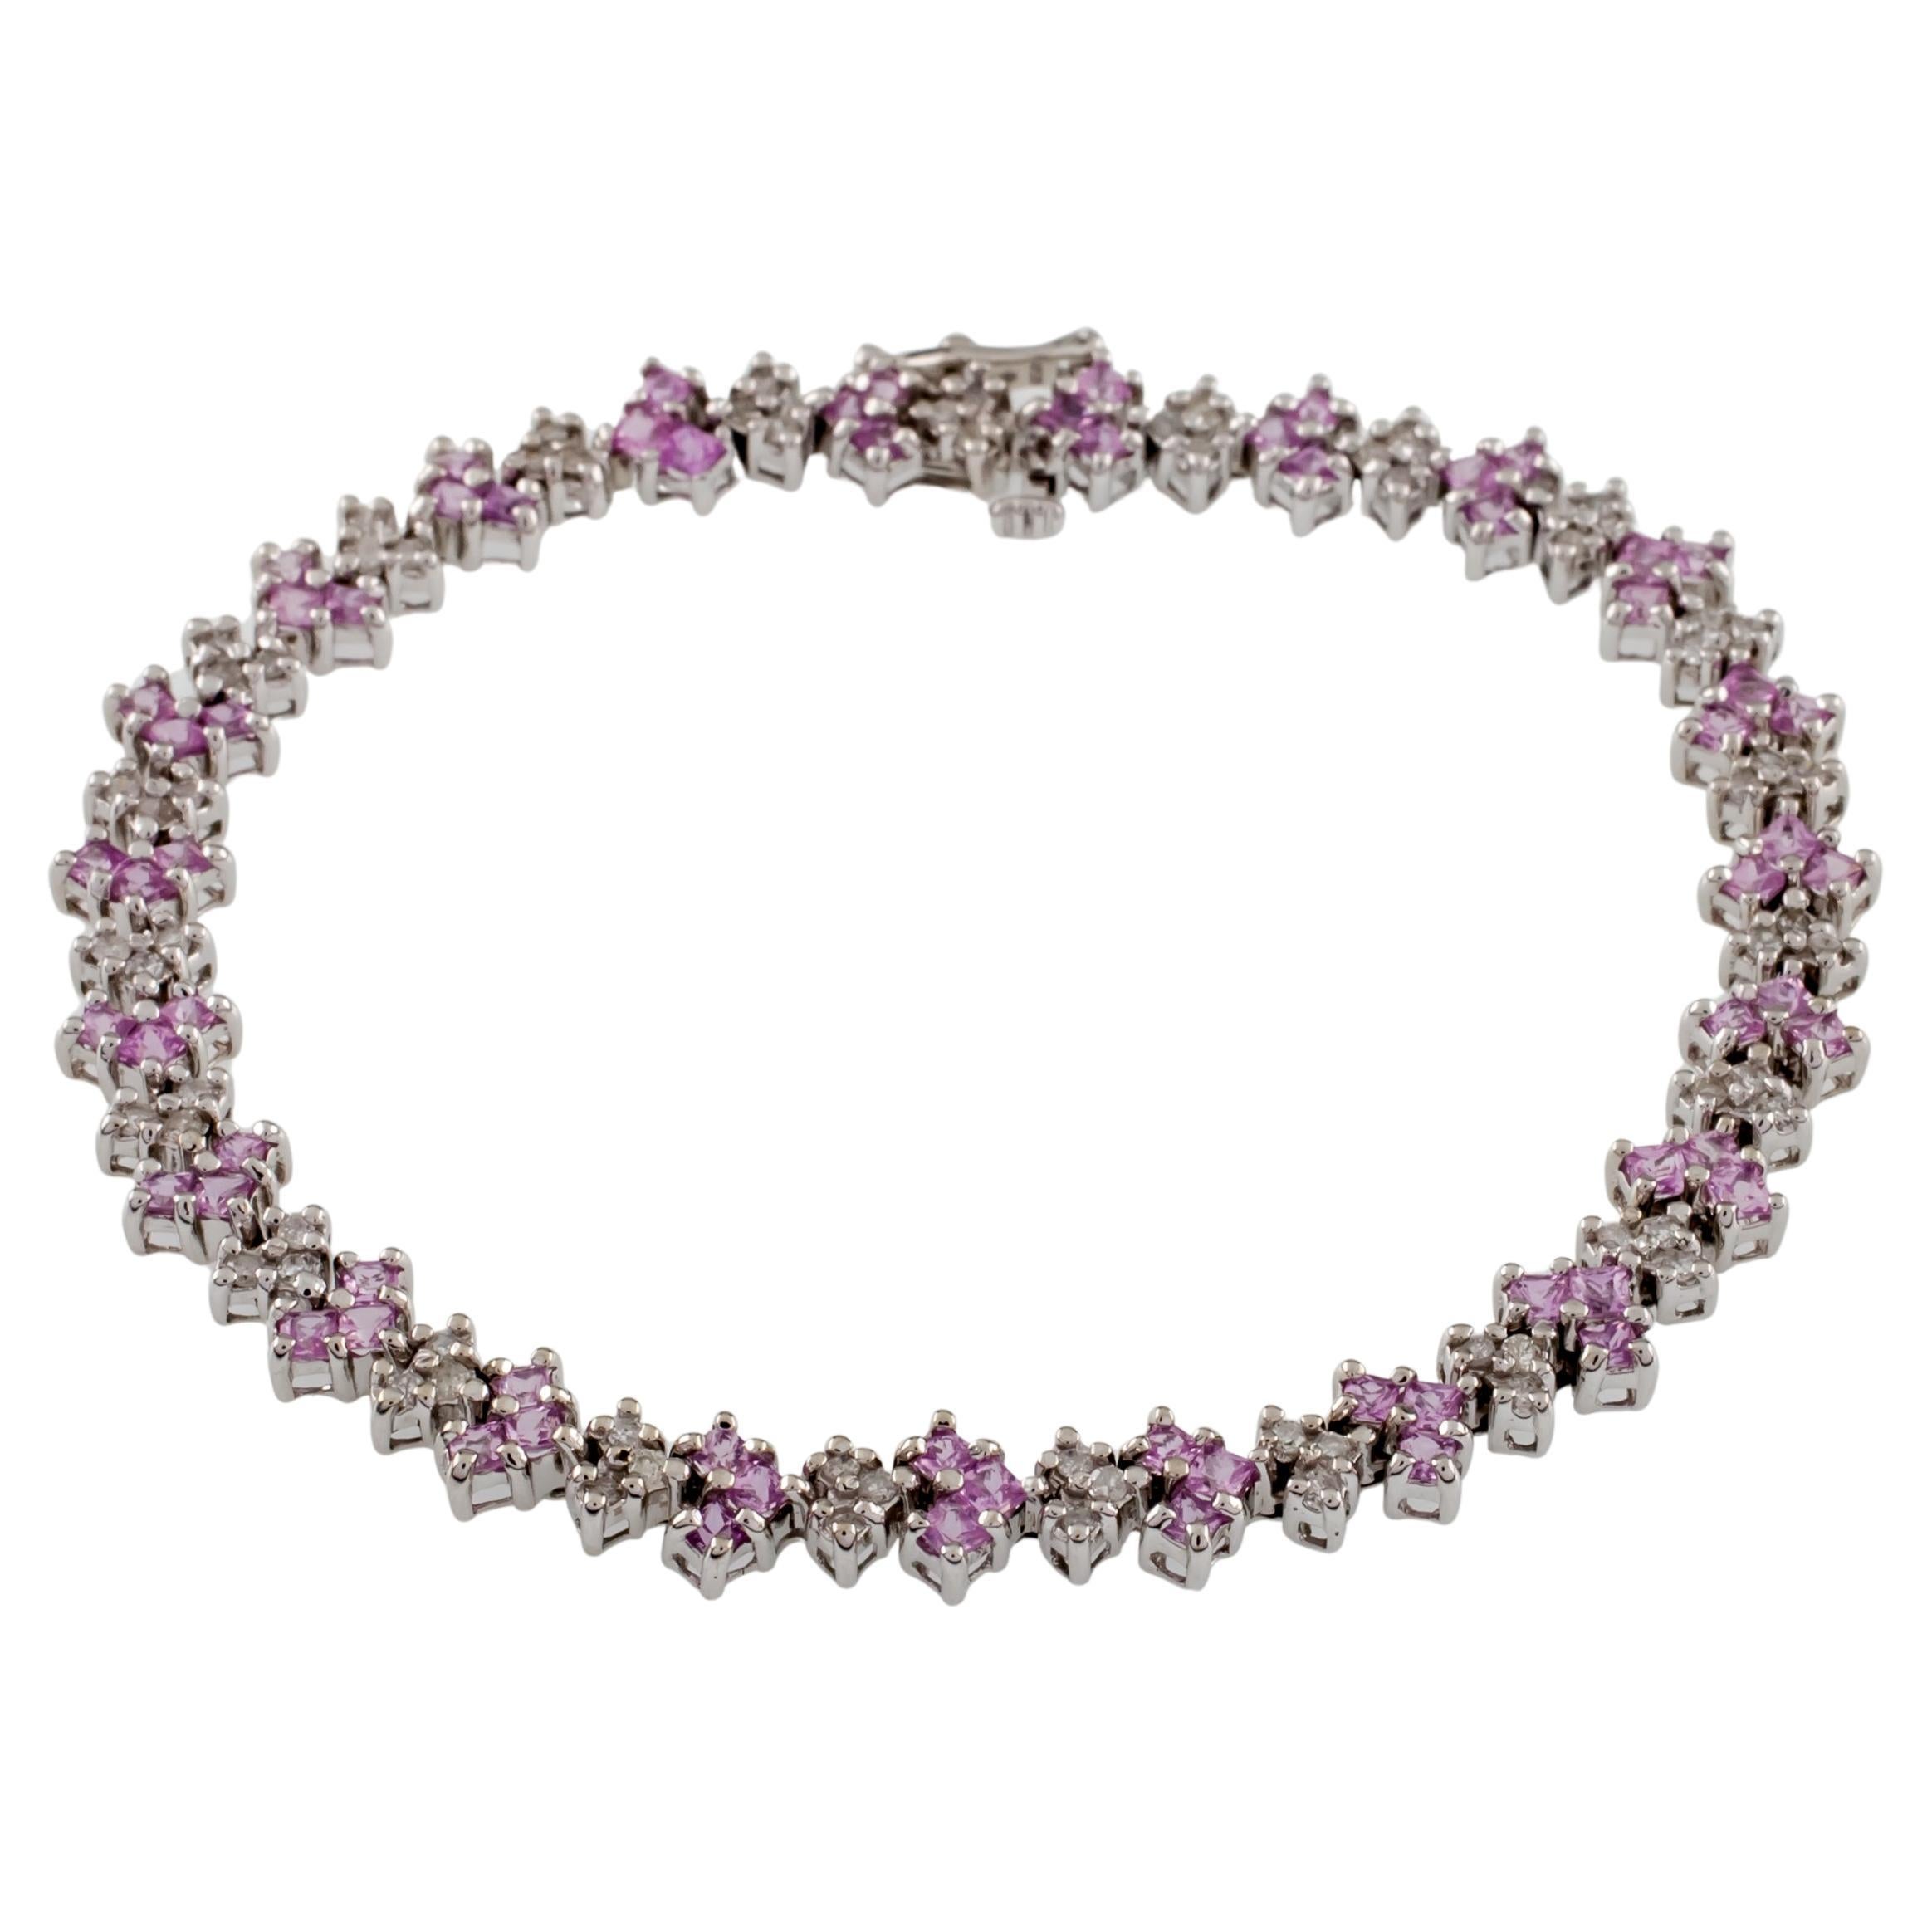 10k White Gold Diamond and Pink Amethyst Tennis Bracelet TDW = 8.28 ct For Sale